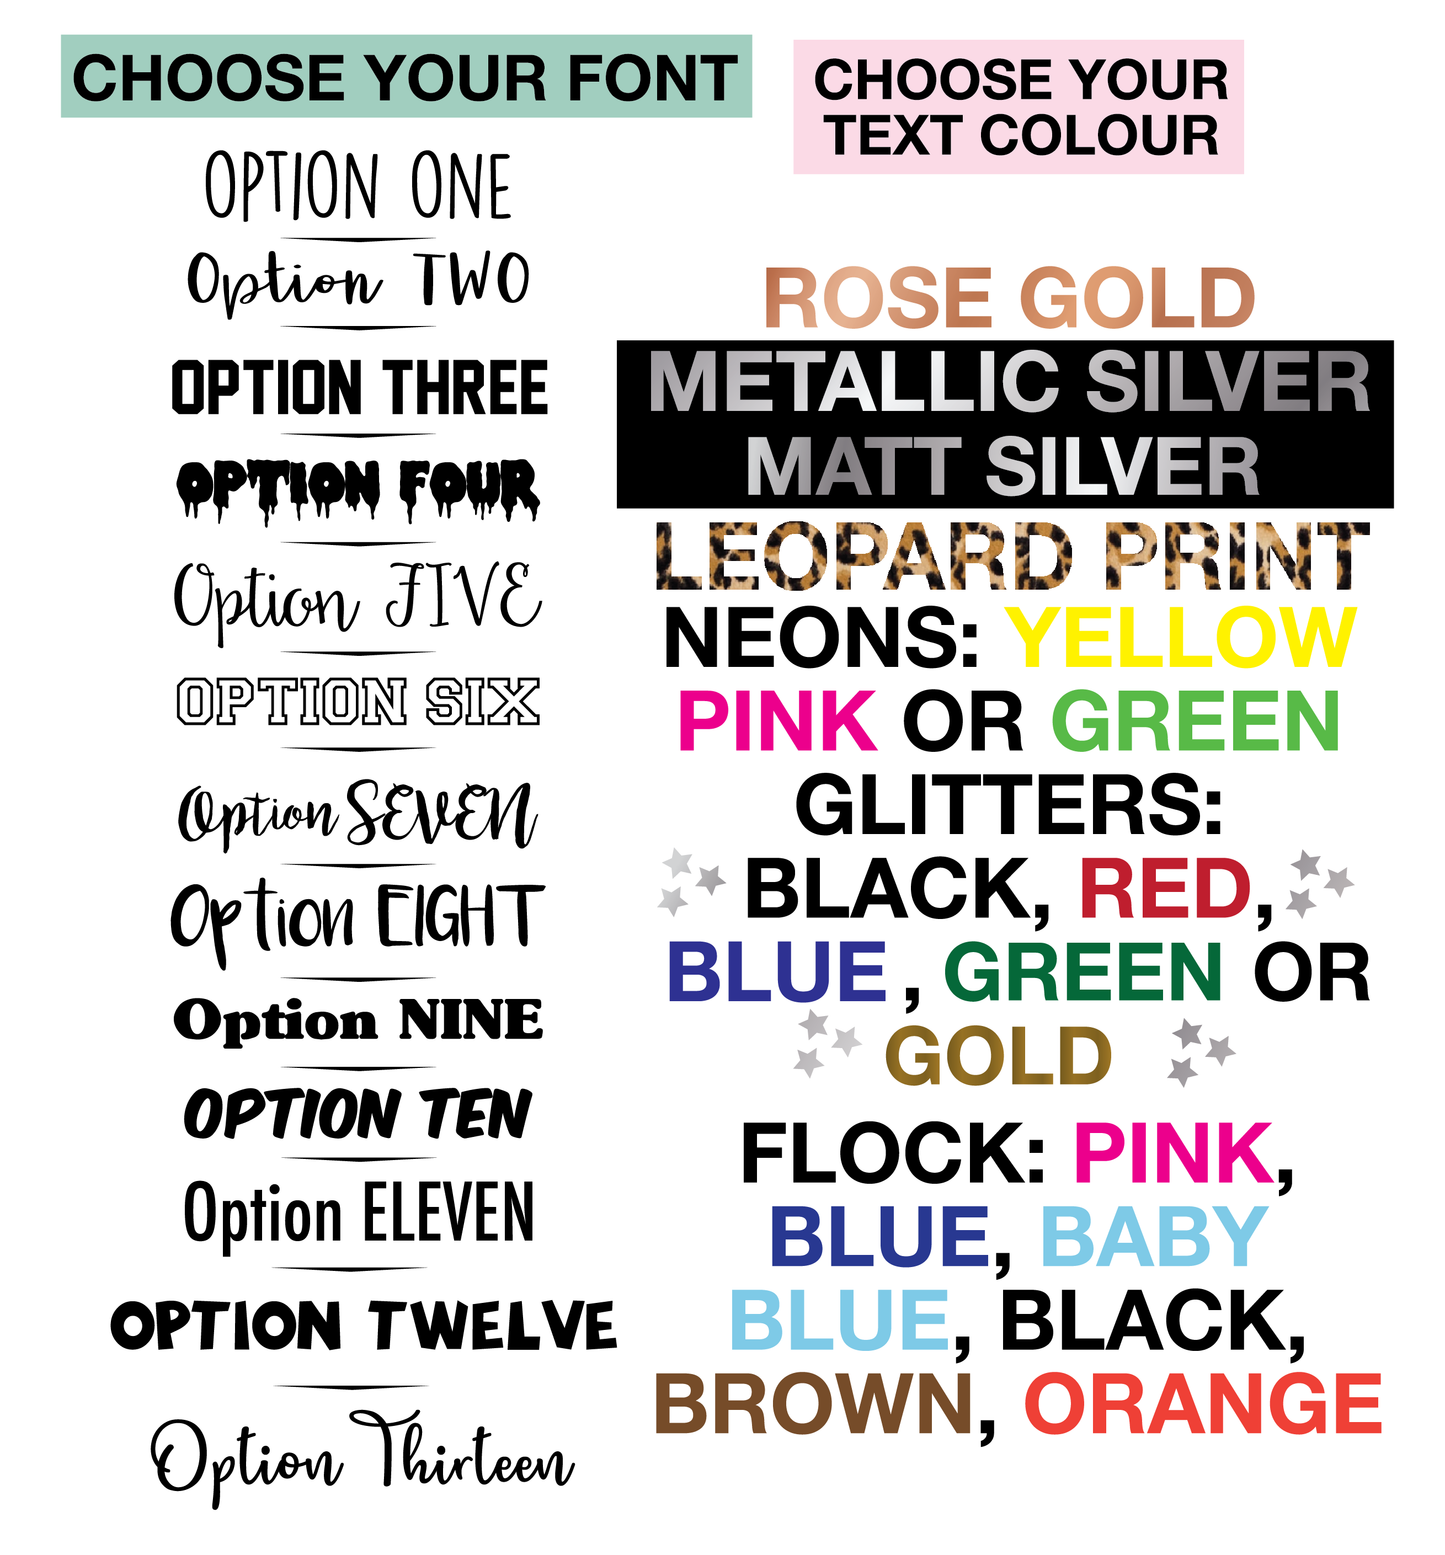 Premium custom order any text colour and font | Apron | Kids and Adults